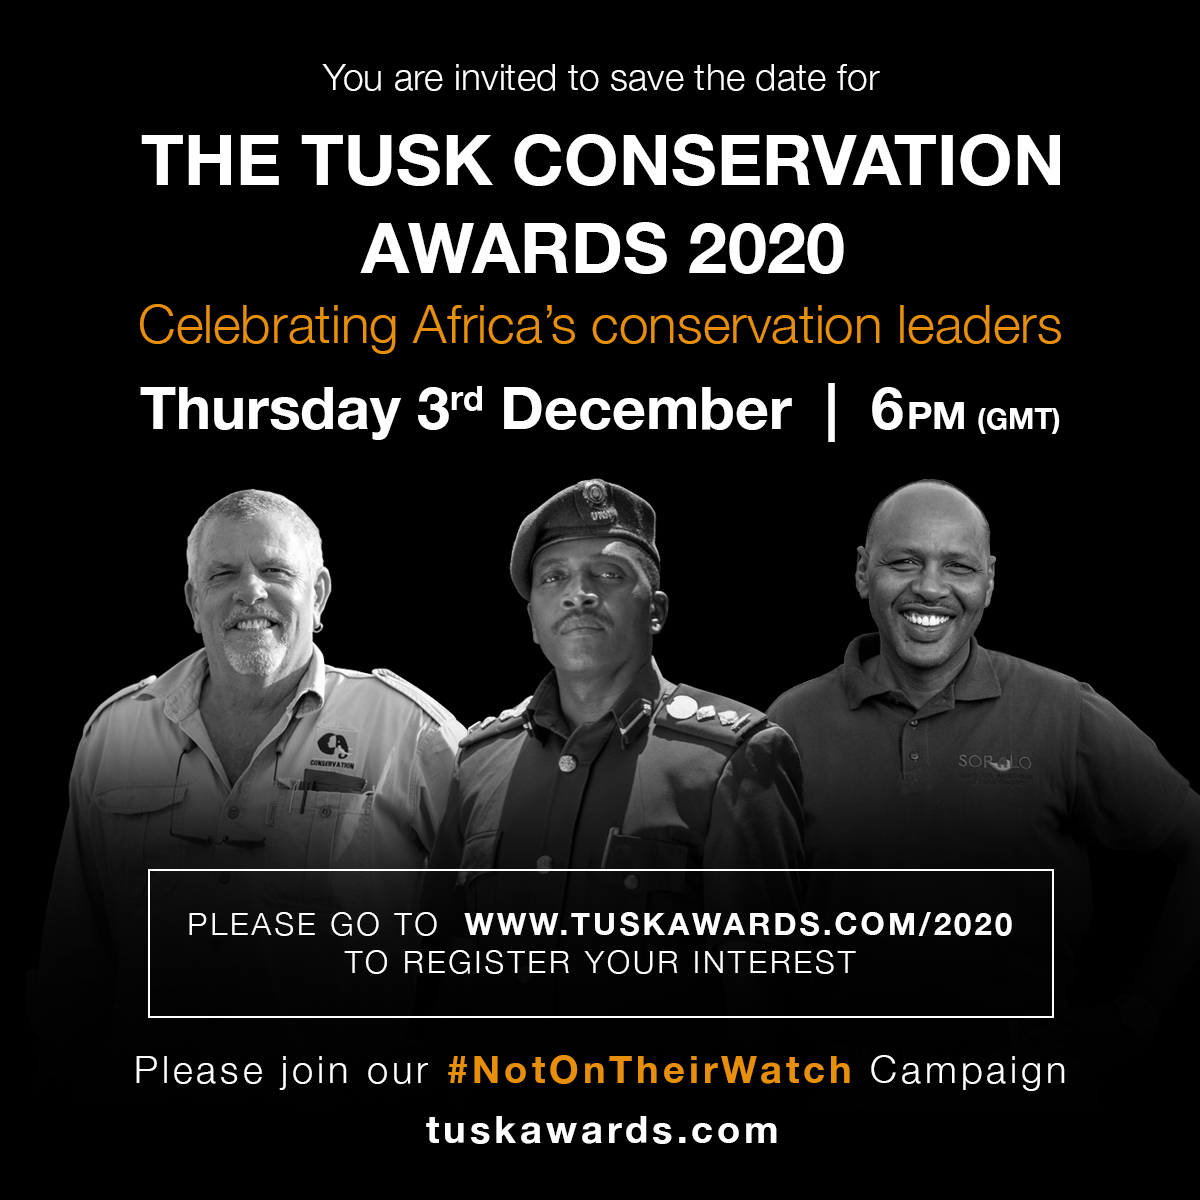 Extinction, loss of habitat and human-wildlife conflict? #NotOnTheirWatch. #LandRover is pleased to be part of the #TuskAwards on 3rd December, a virtual celebration of Africa’s conservation heroes. Join us live: tuskawards.com/2020
#NotOnTheirWatch #ForAllTheyDo @tusk_org